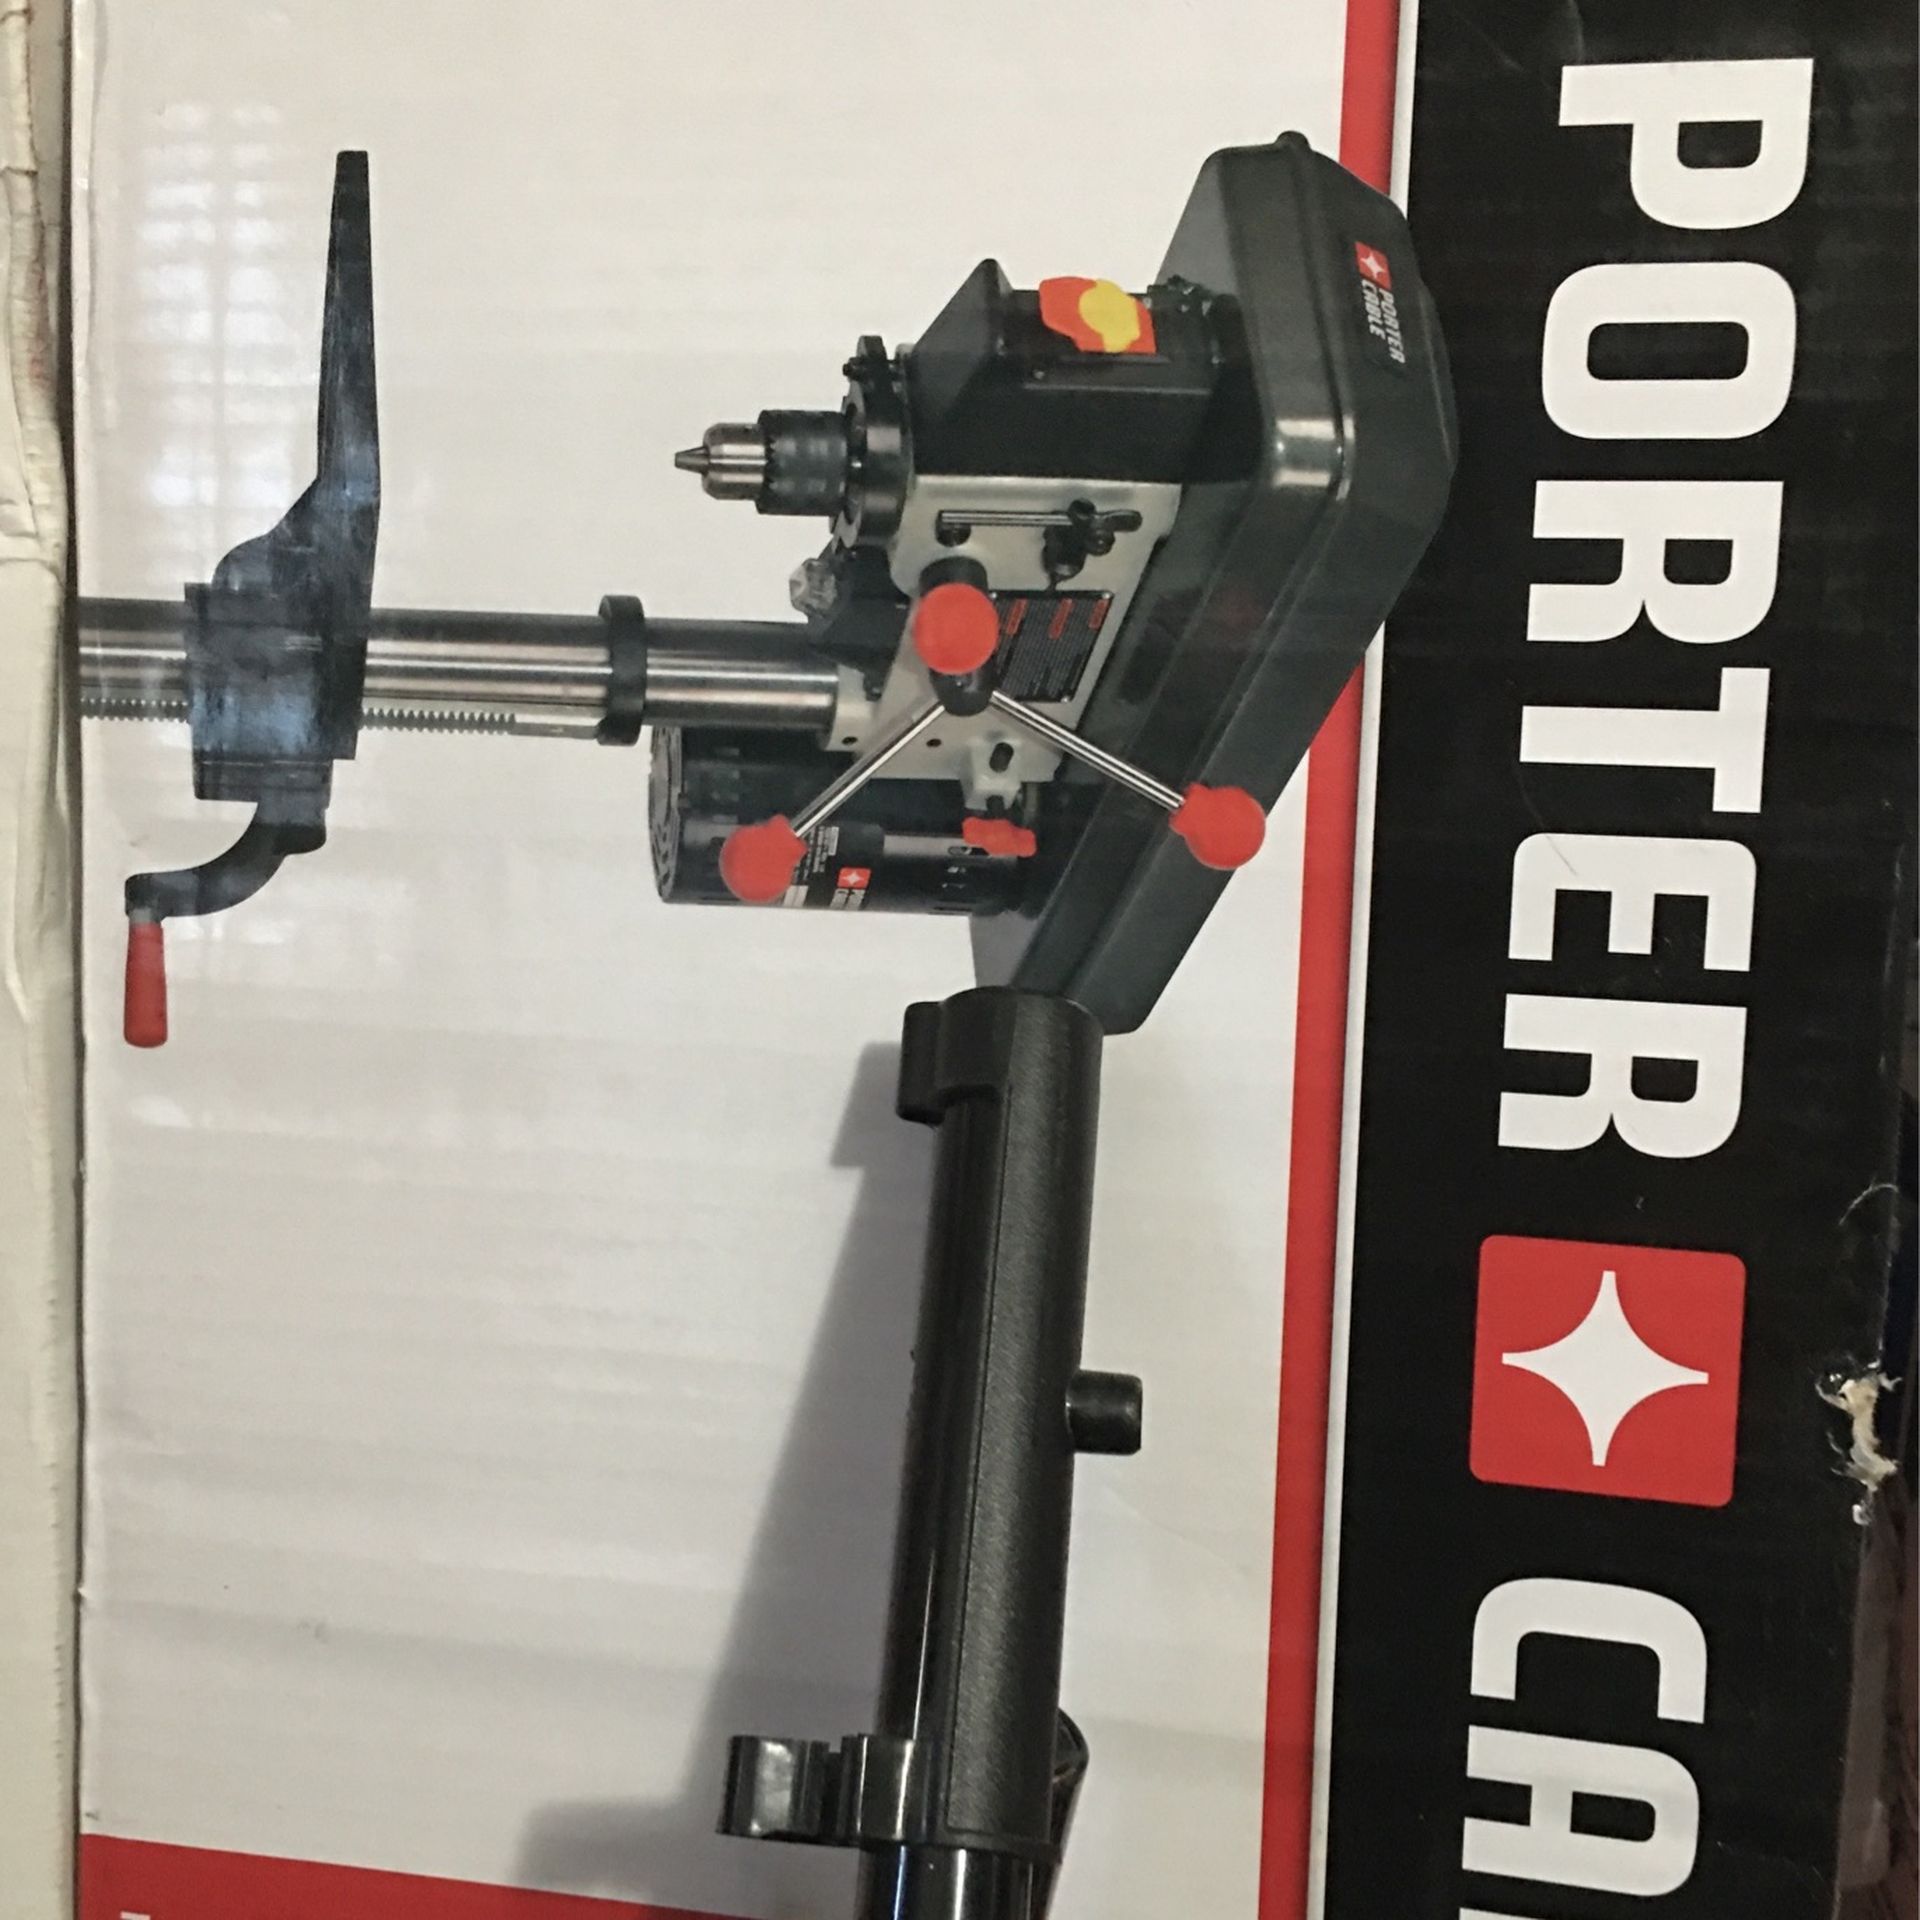 PORTER-CABLE 3.2-Amp 5-Speed Bench Drill Press Item #811073Model #PCXB620DP